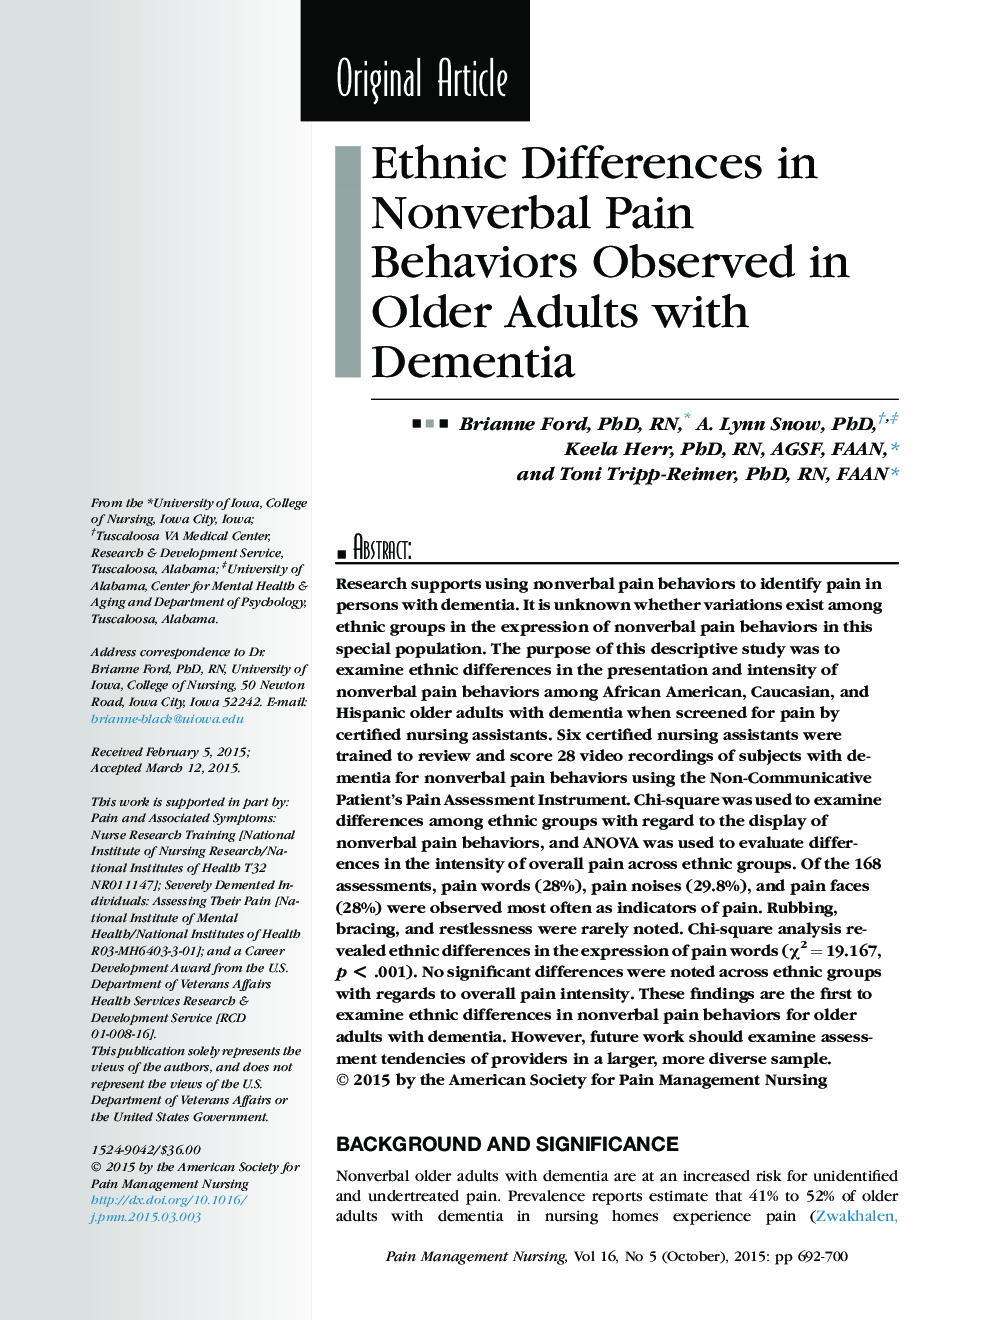 Ethnic Differences in Nonverbal Pain Behaviors Observed in Older Adults with Dementia 